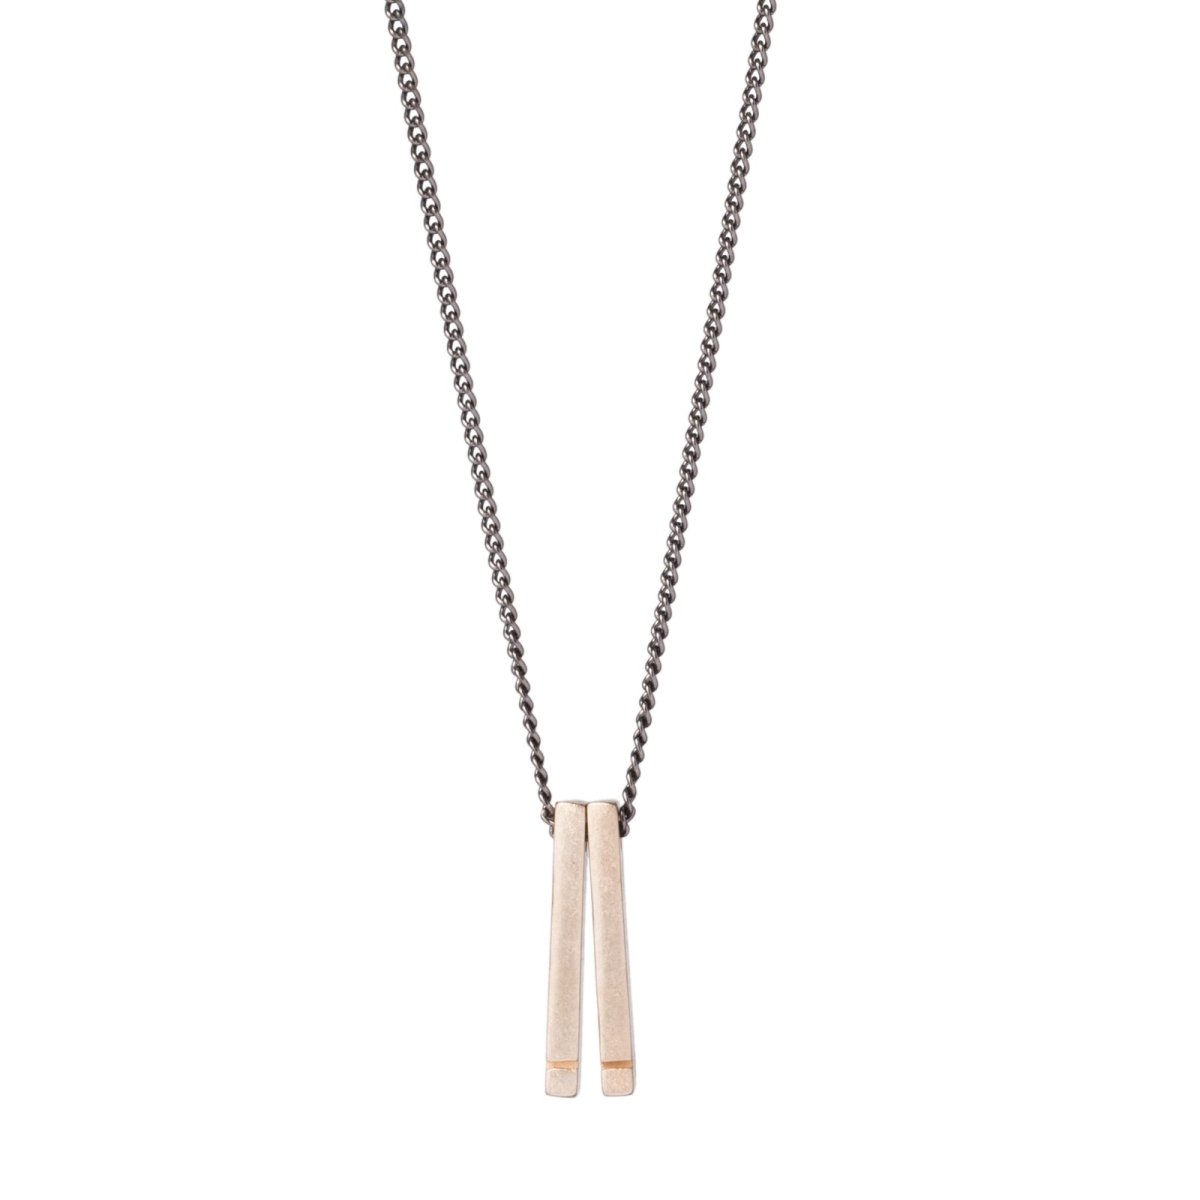 Simple, delicate, 18 inch-long necklace, with two bronze bars dangling from a gunmetal chain. Hand-crafted in Portland, Oregon. 